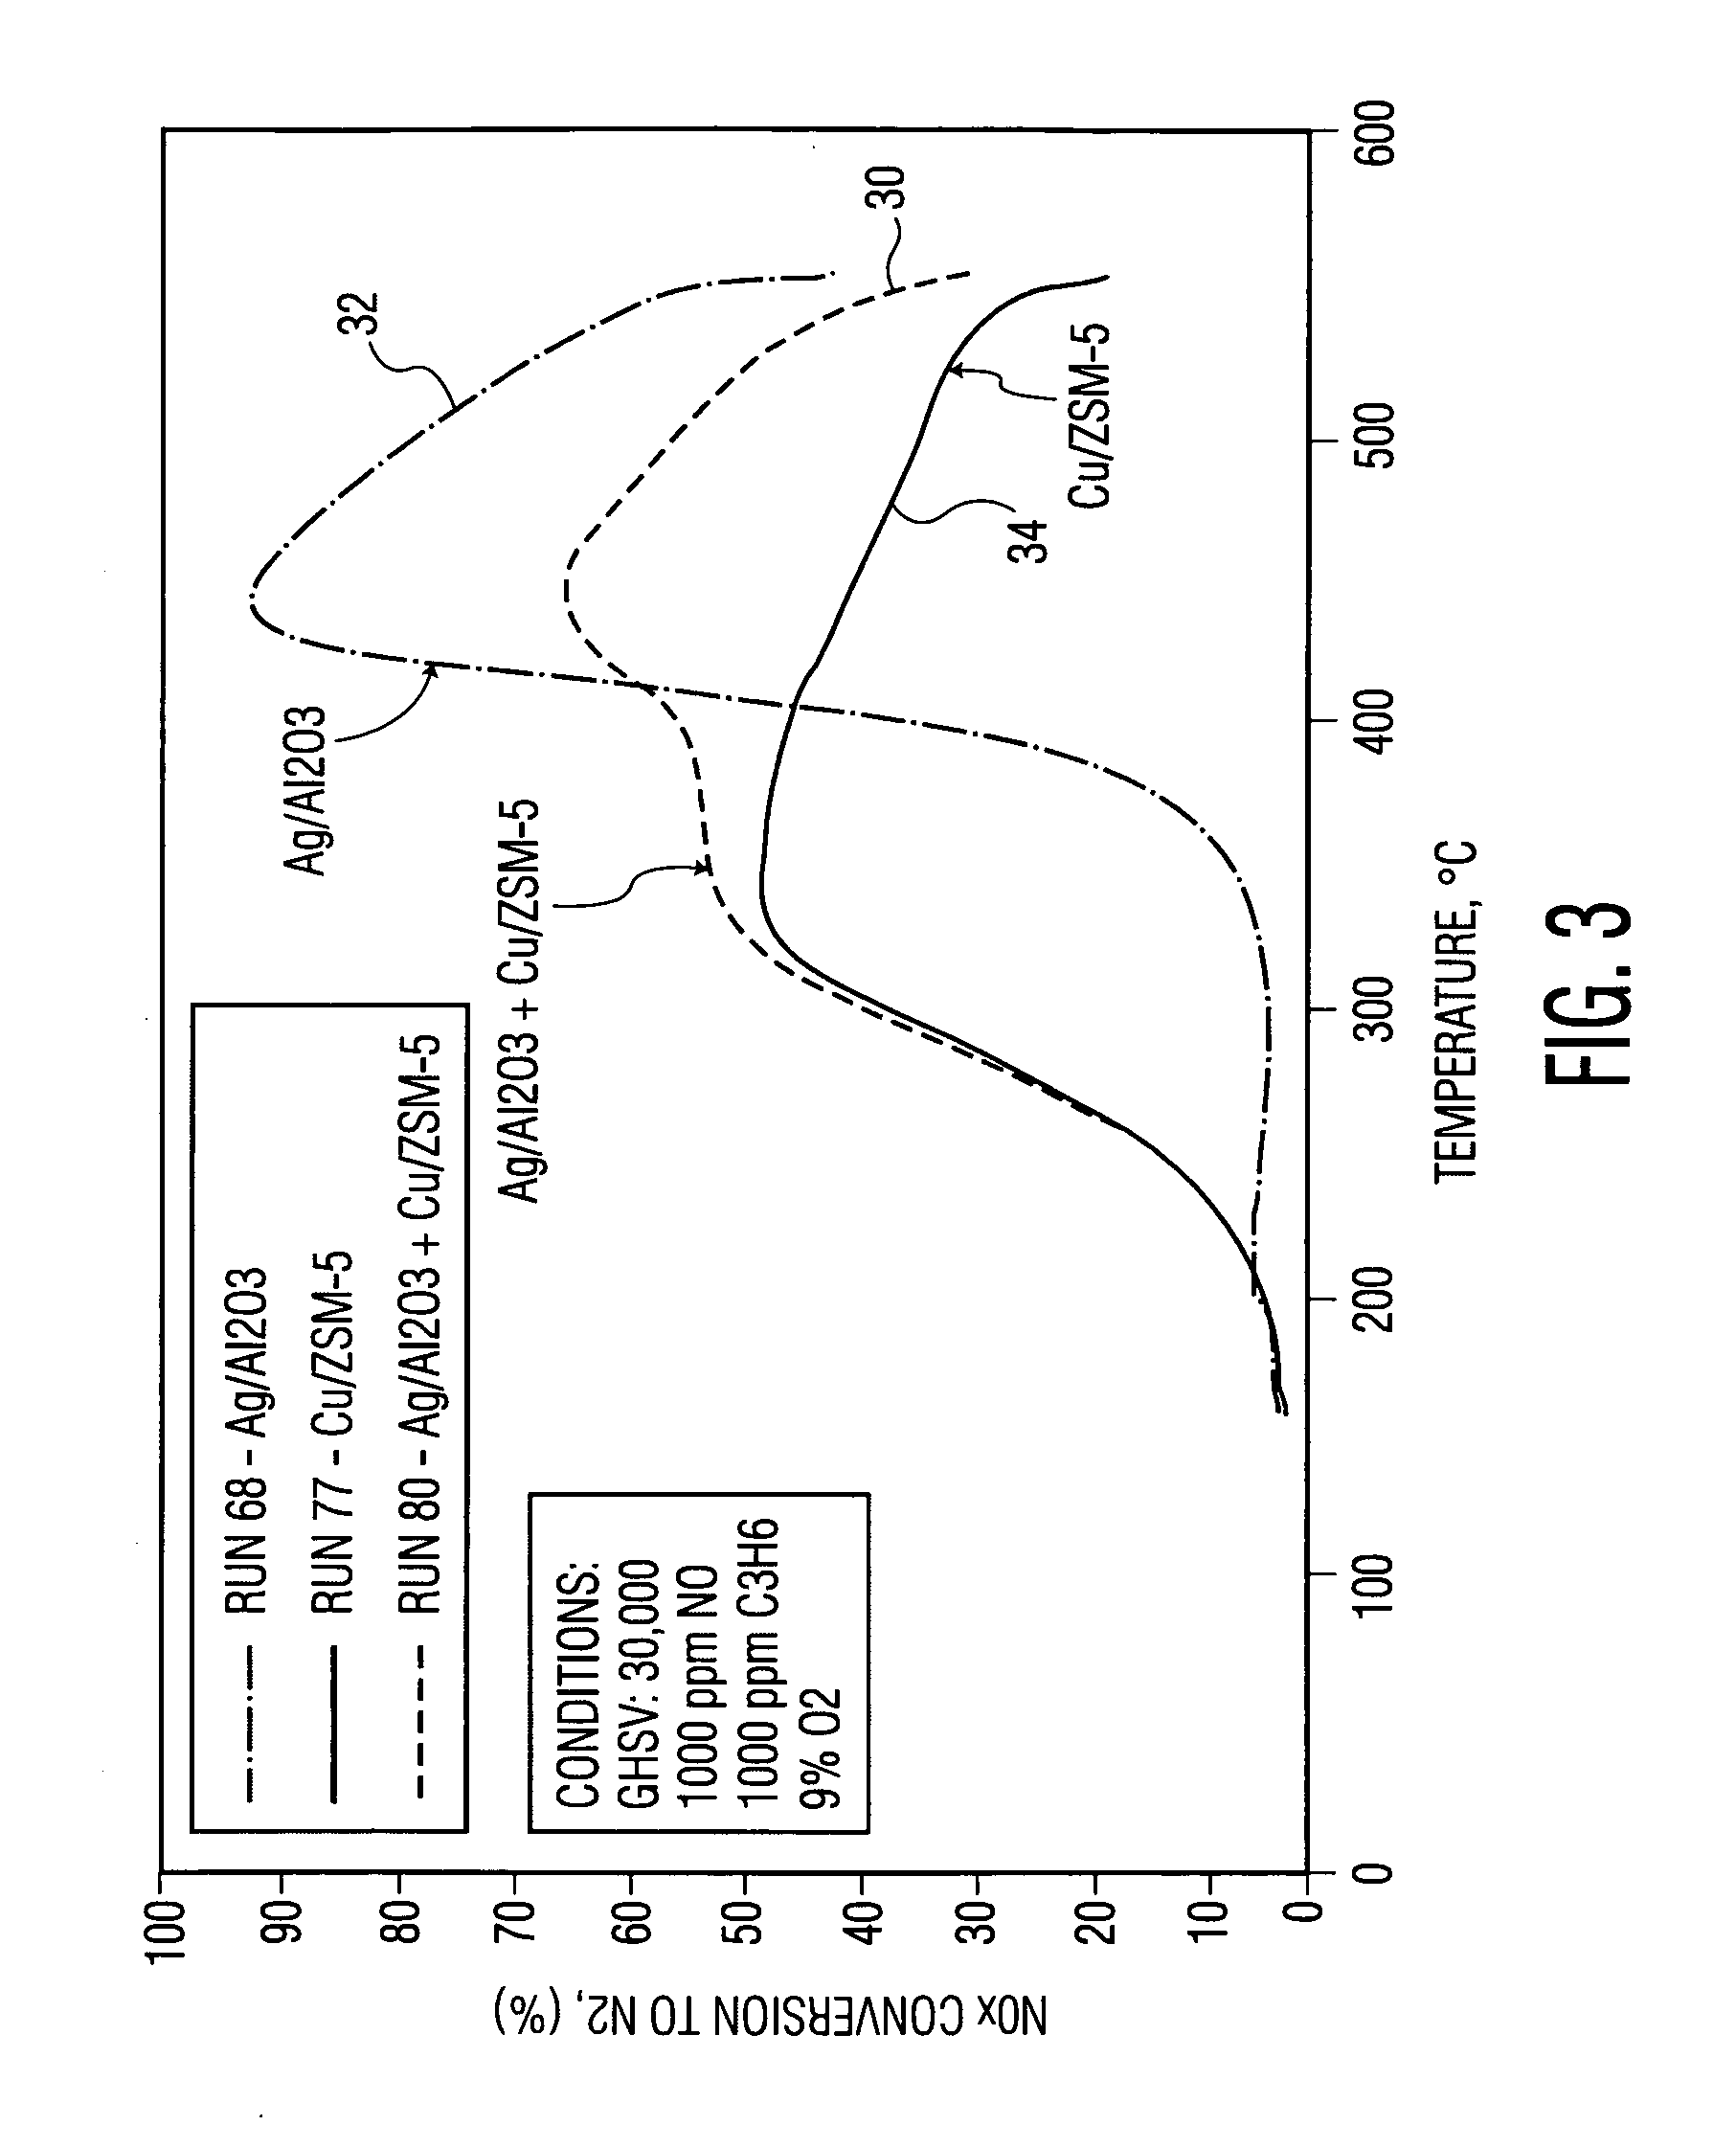 Reformer assisted lean NOx catalyst aftertreatment system and method